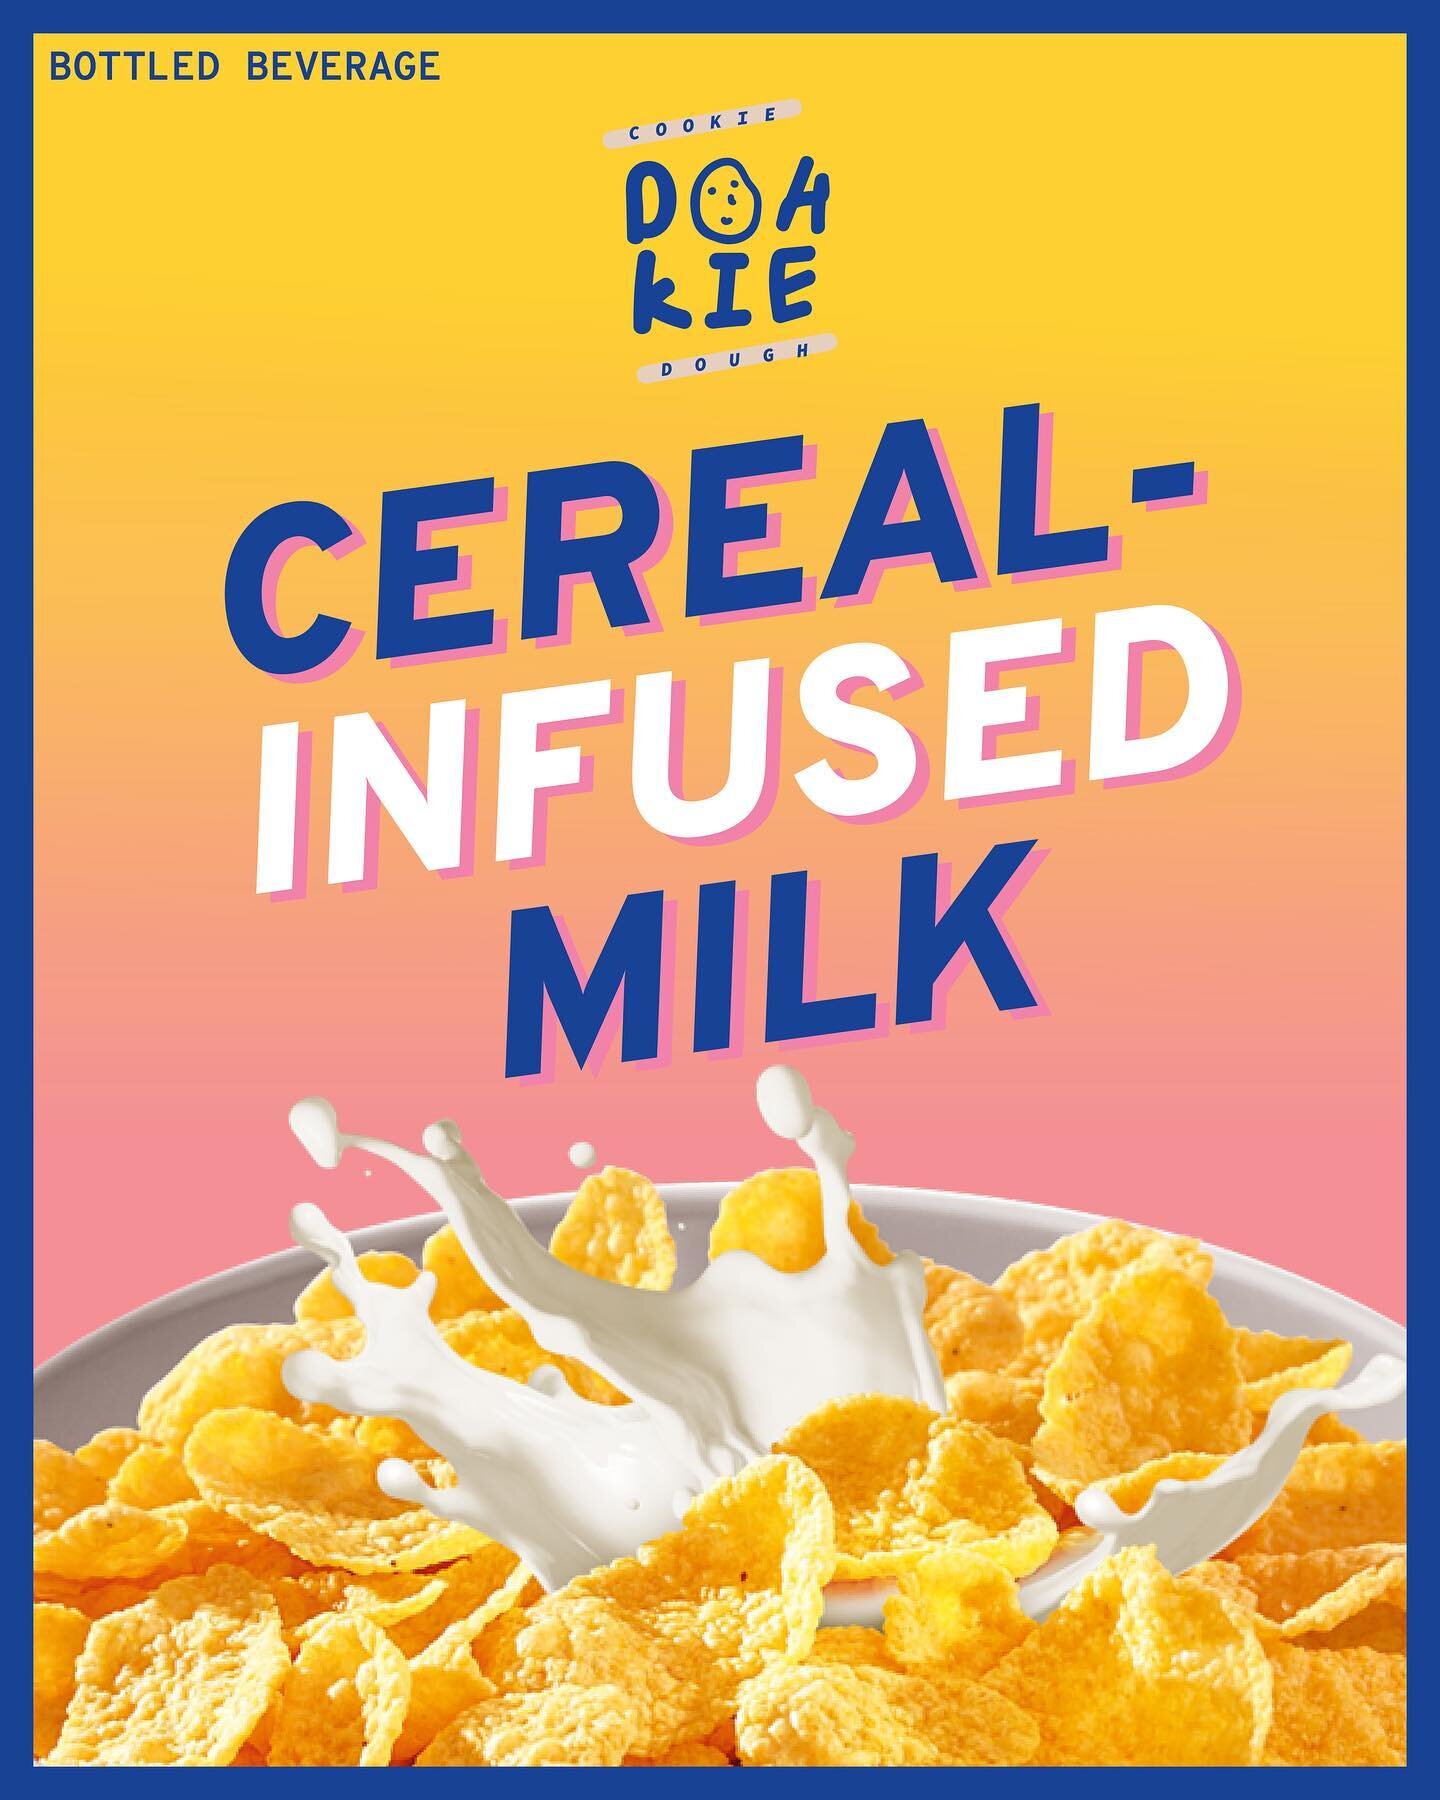 CEREAL-INFUSED MILK RESTOCKED!!!🥛🌈☀️

Available on our web store, storefront, Foodpanda, and Deliveroo~

(Don&rsquo;t know what to get? Get yourself a Starter Pack 😙)